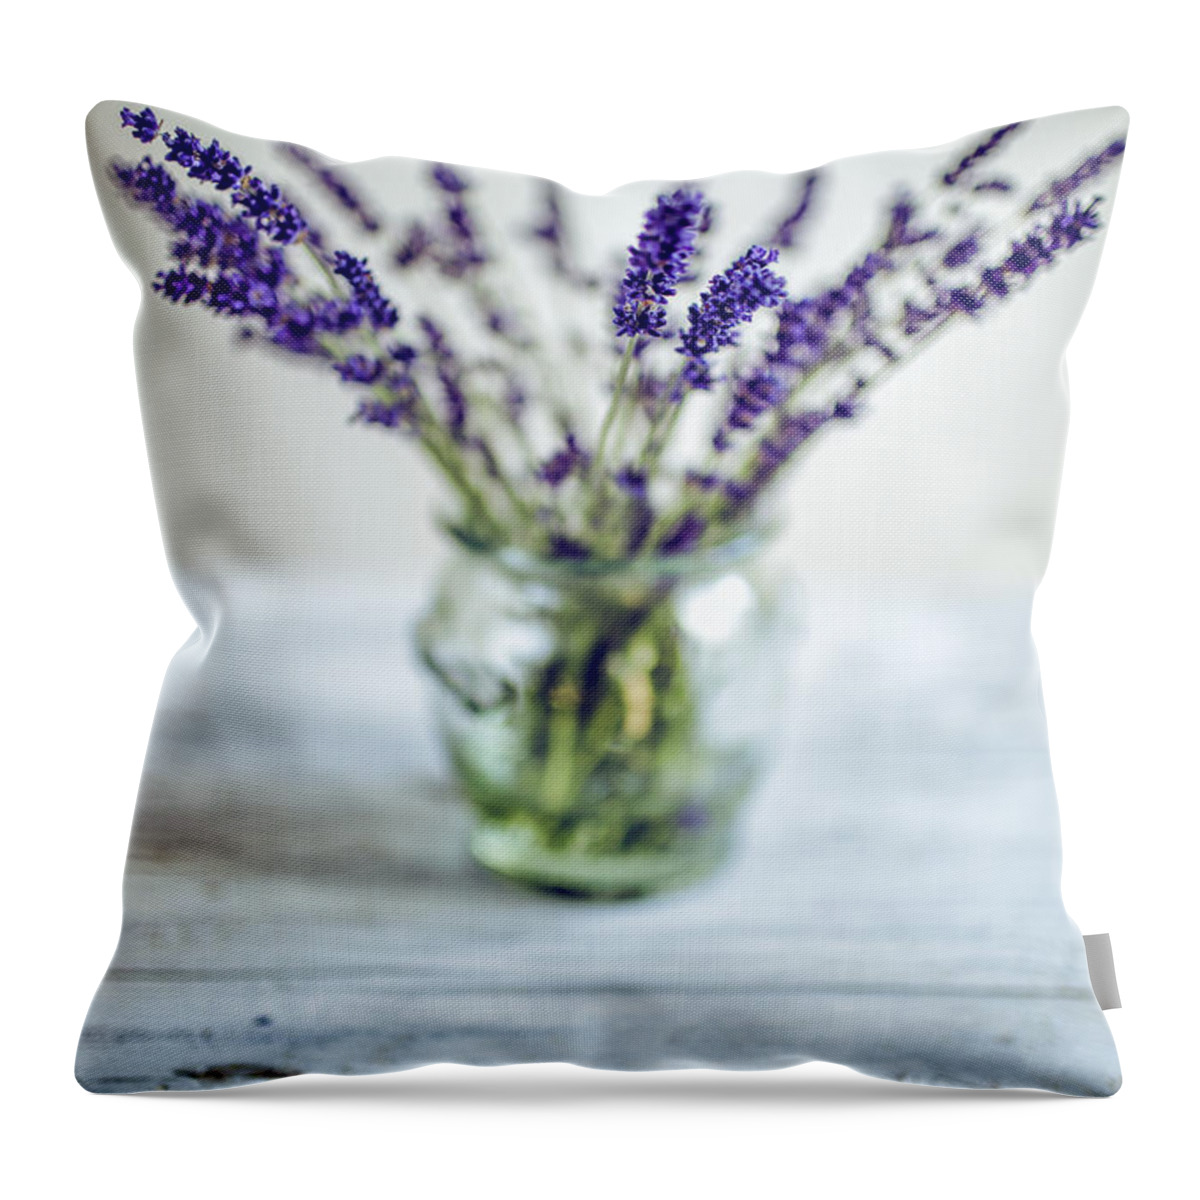 Lavender Throw Pillow featuring the photograph Lavender Still Life by Nailia Schwarz